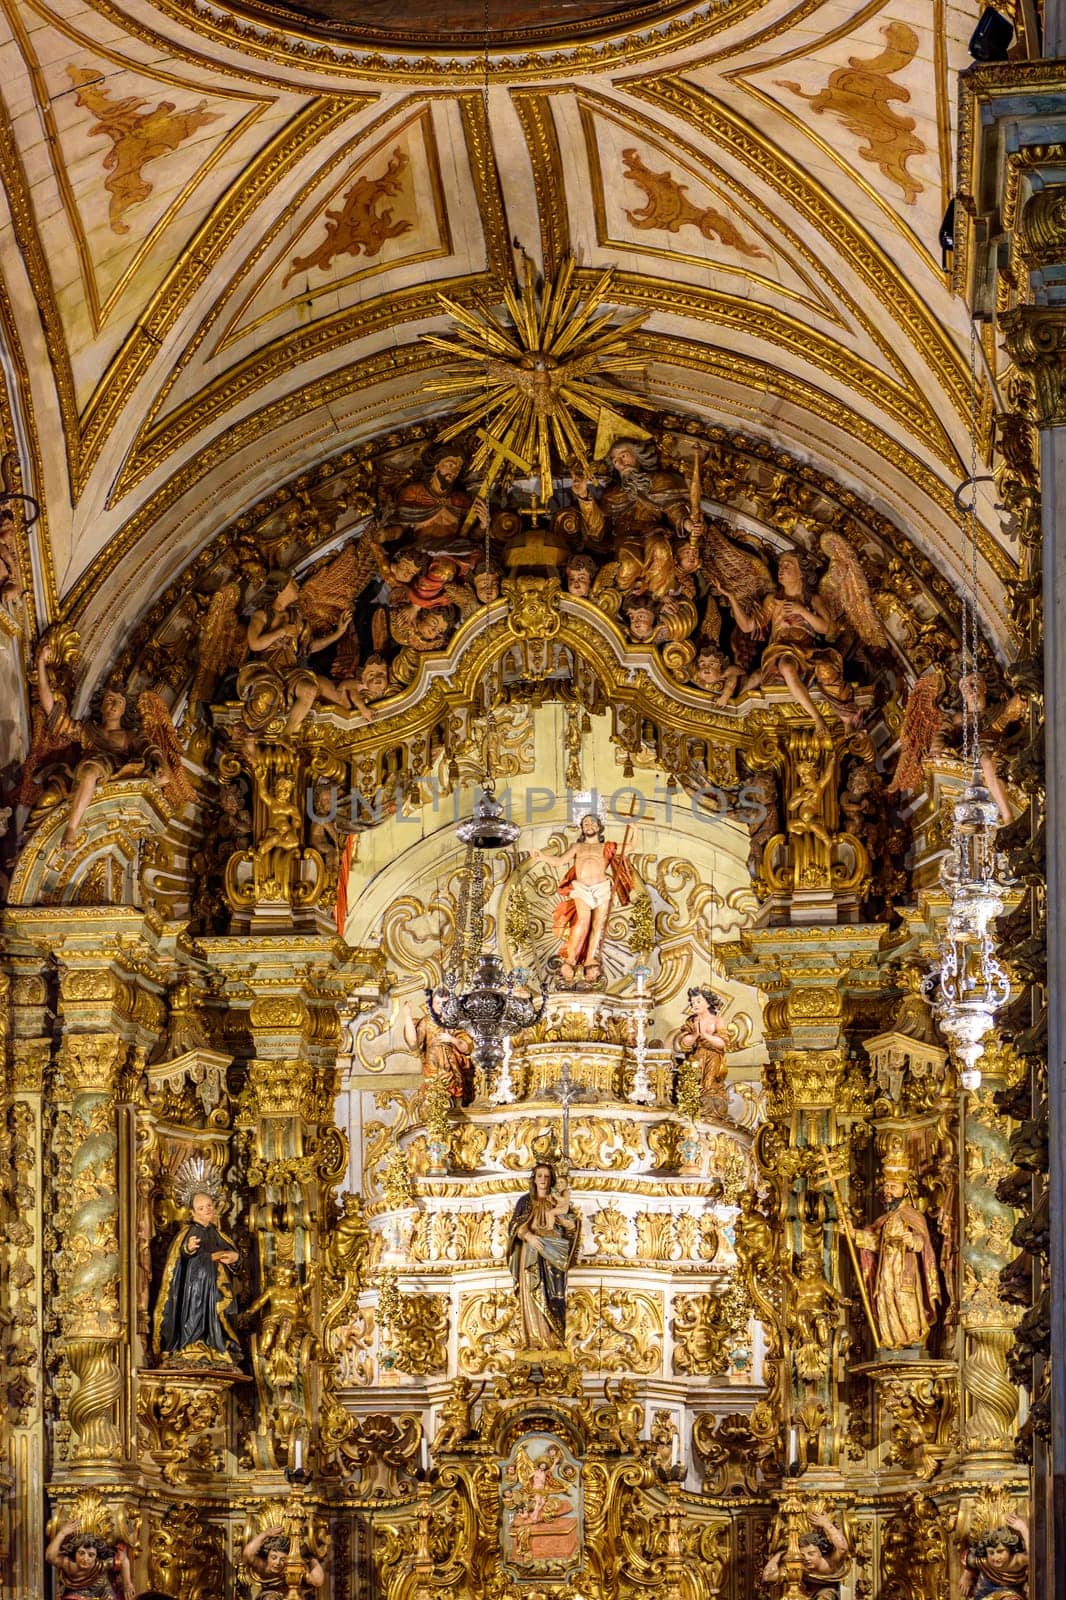 Old altar of a historic baroque church completely covered in gold in Ouro Preto, Minas Gerais